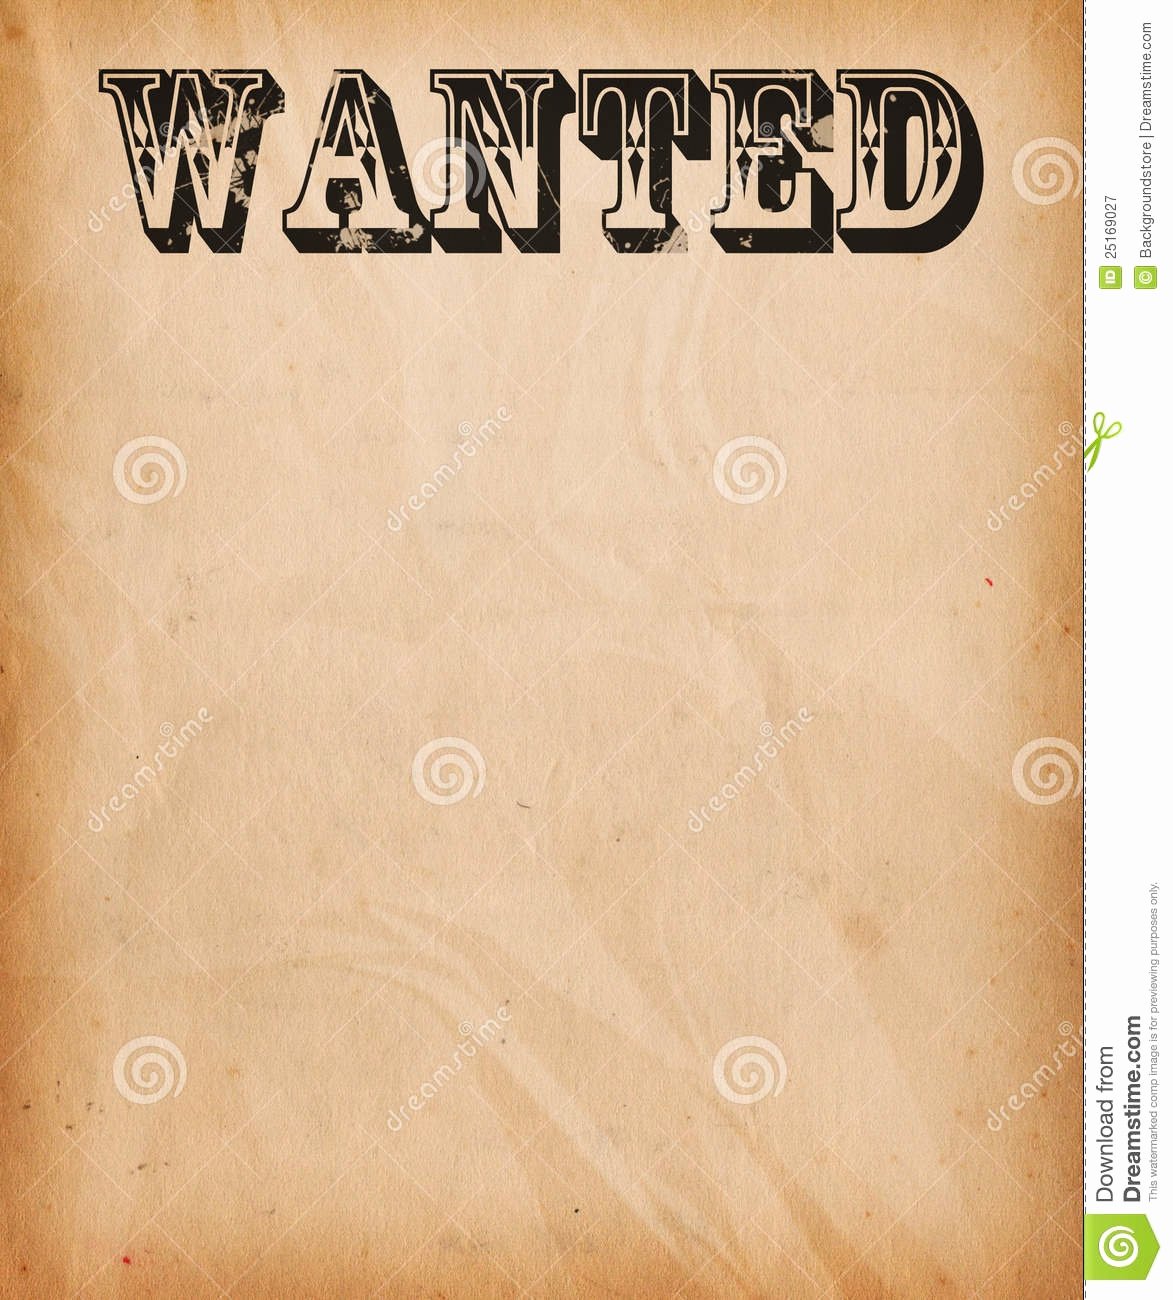 Wanted Poster Background